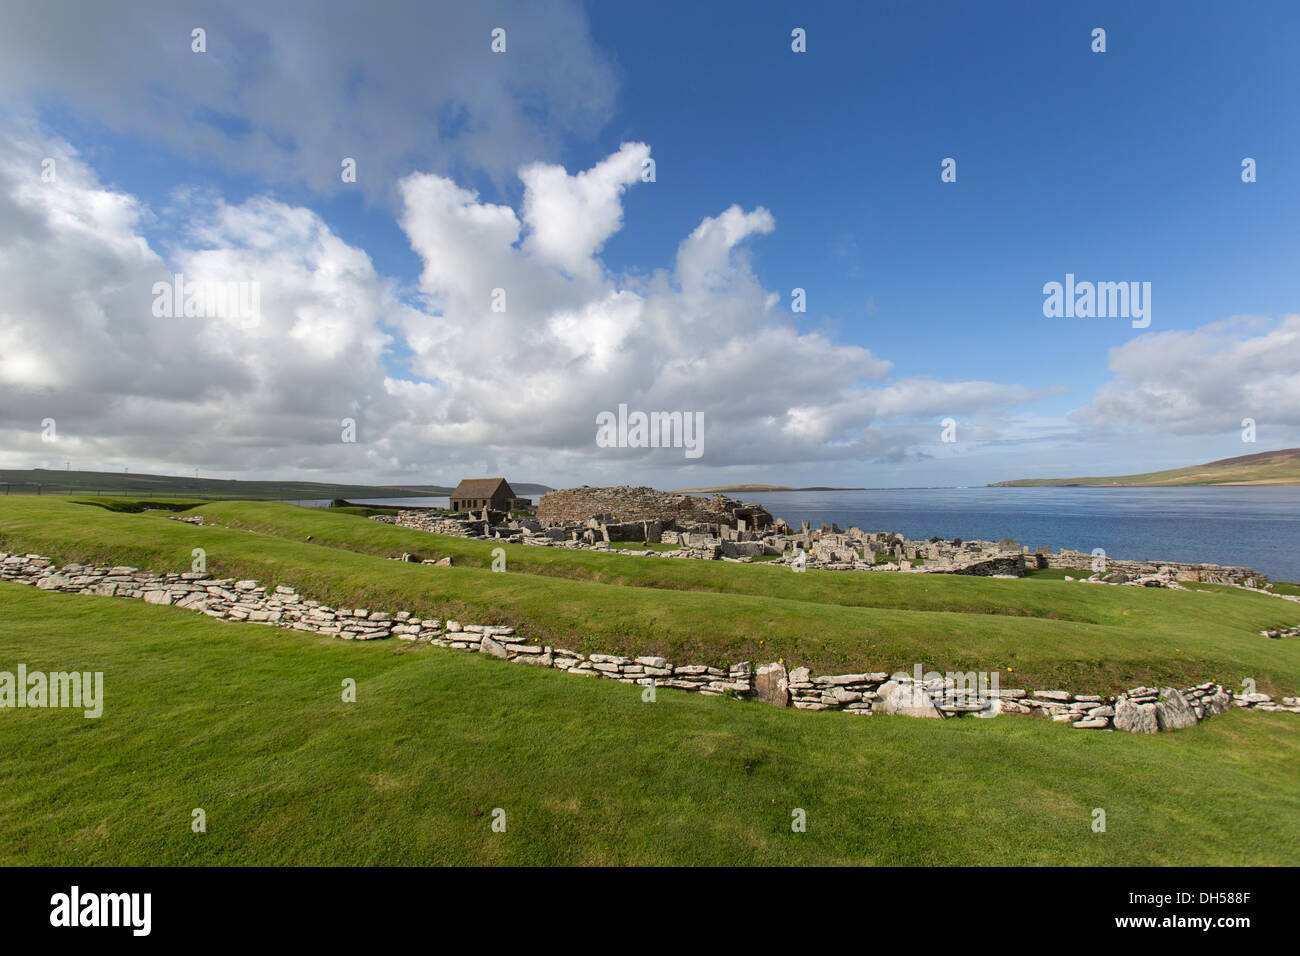 Islands of Orkney, Scotland. Picturesque view of the broch village at Gurness, with Eynhallow Sound in the background. Stock Photo